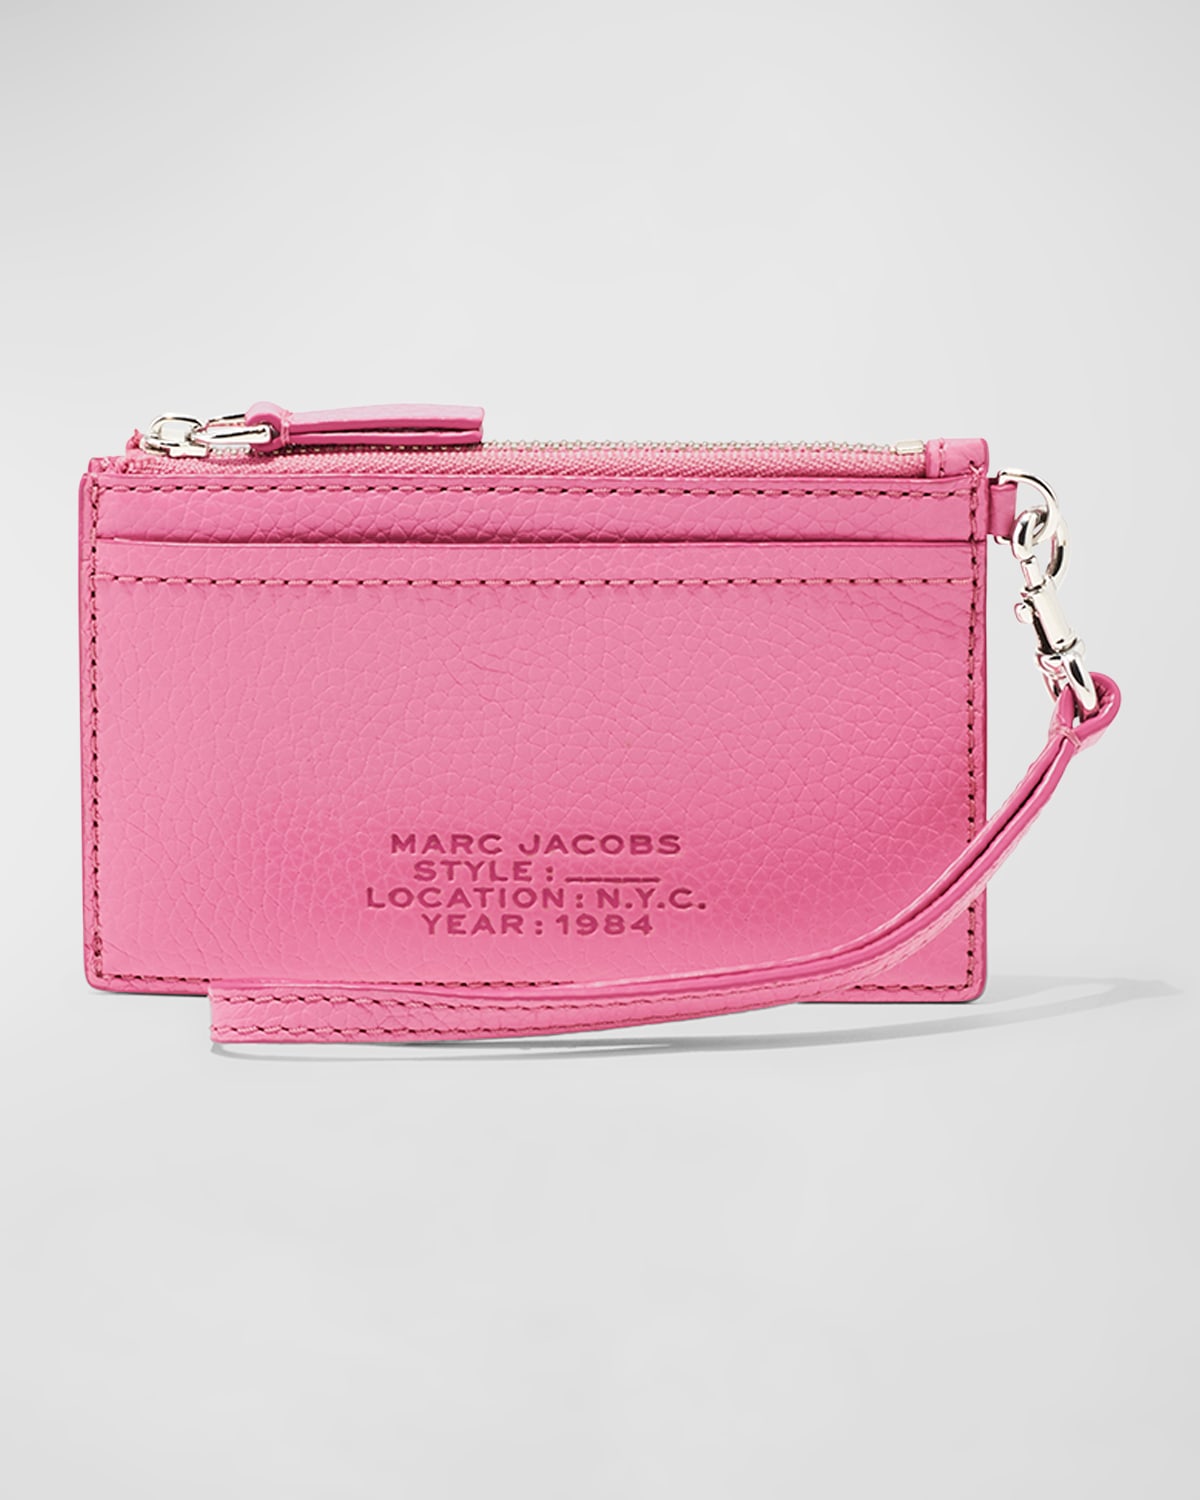 Marc Jacobs The Leather Top Zip Wristlet In Candy Pink/silver